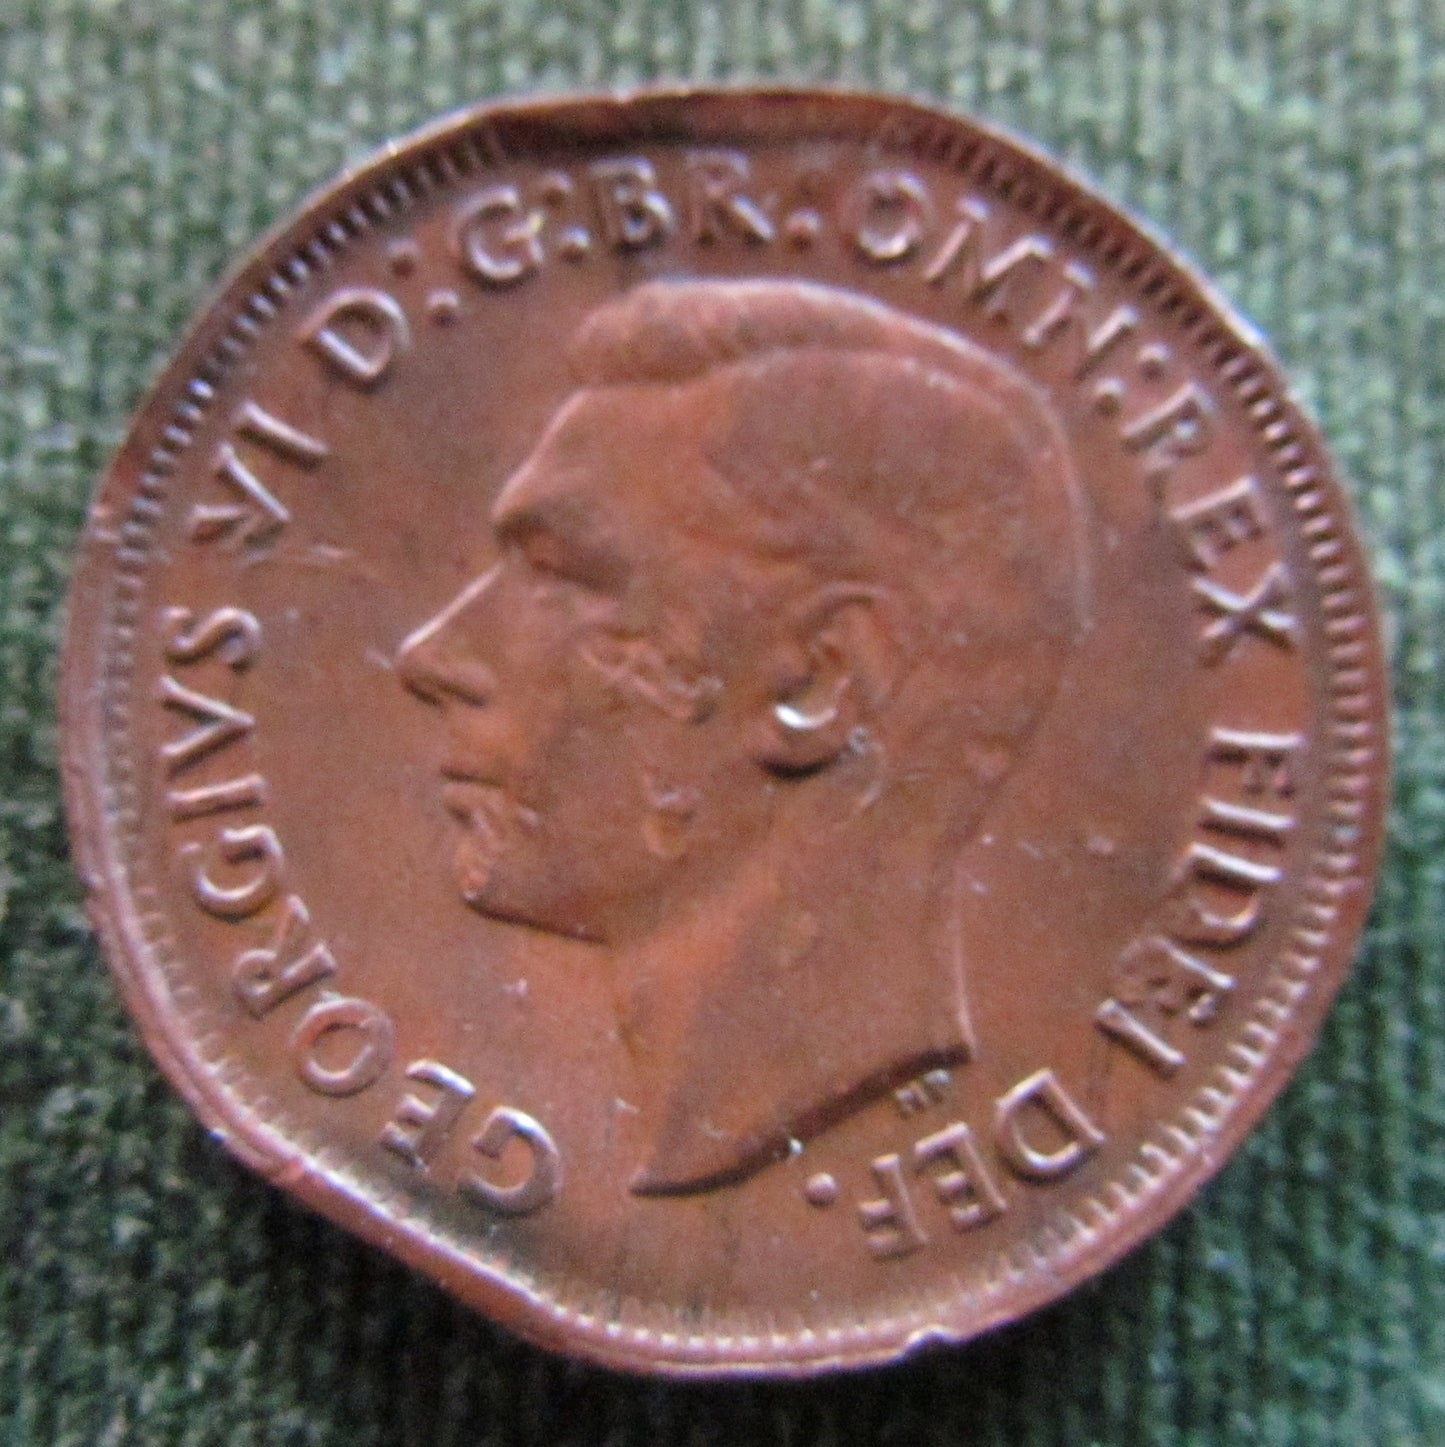 Australian 1951 Y. 1/2d Half Penny King George VI Coin - Variety Clipped